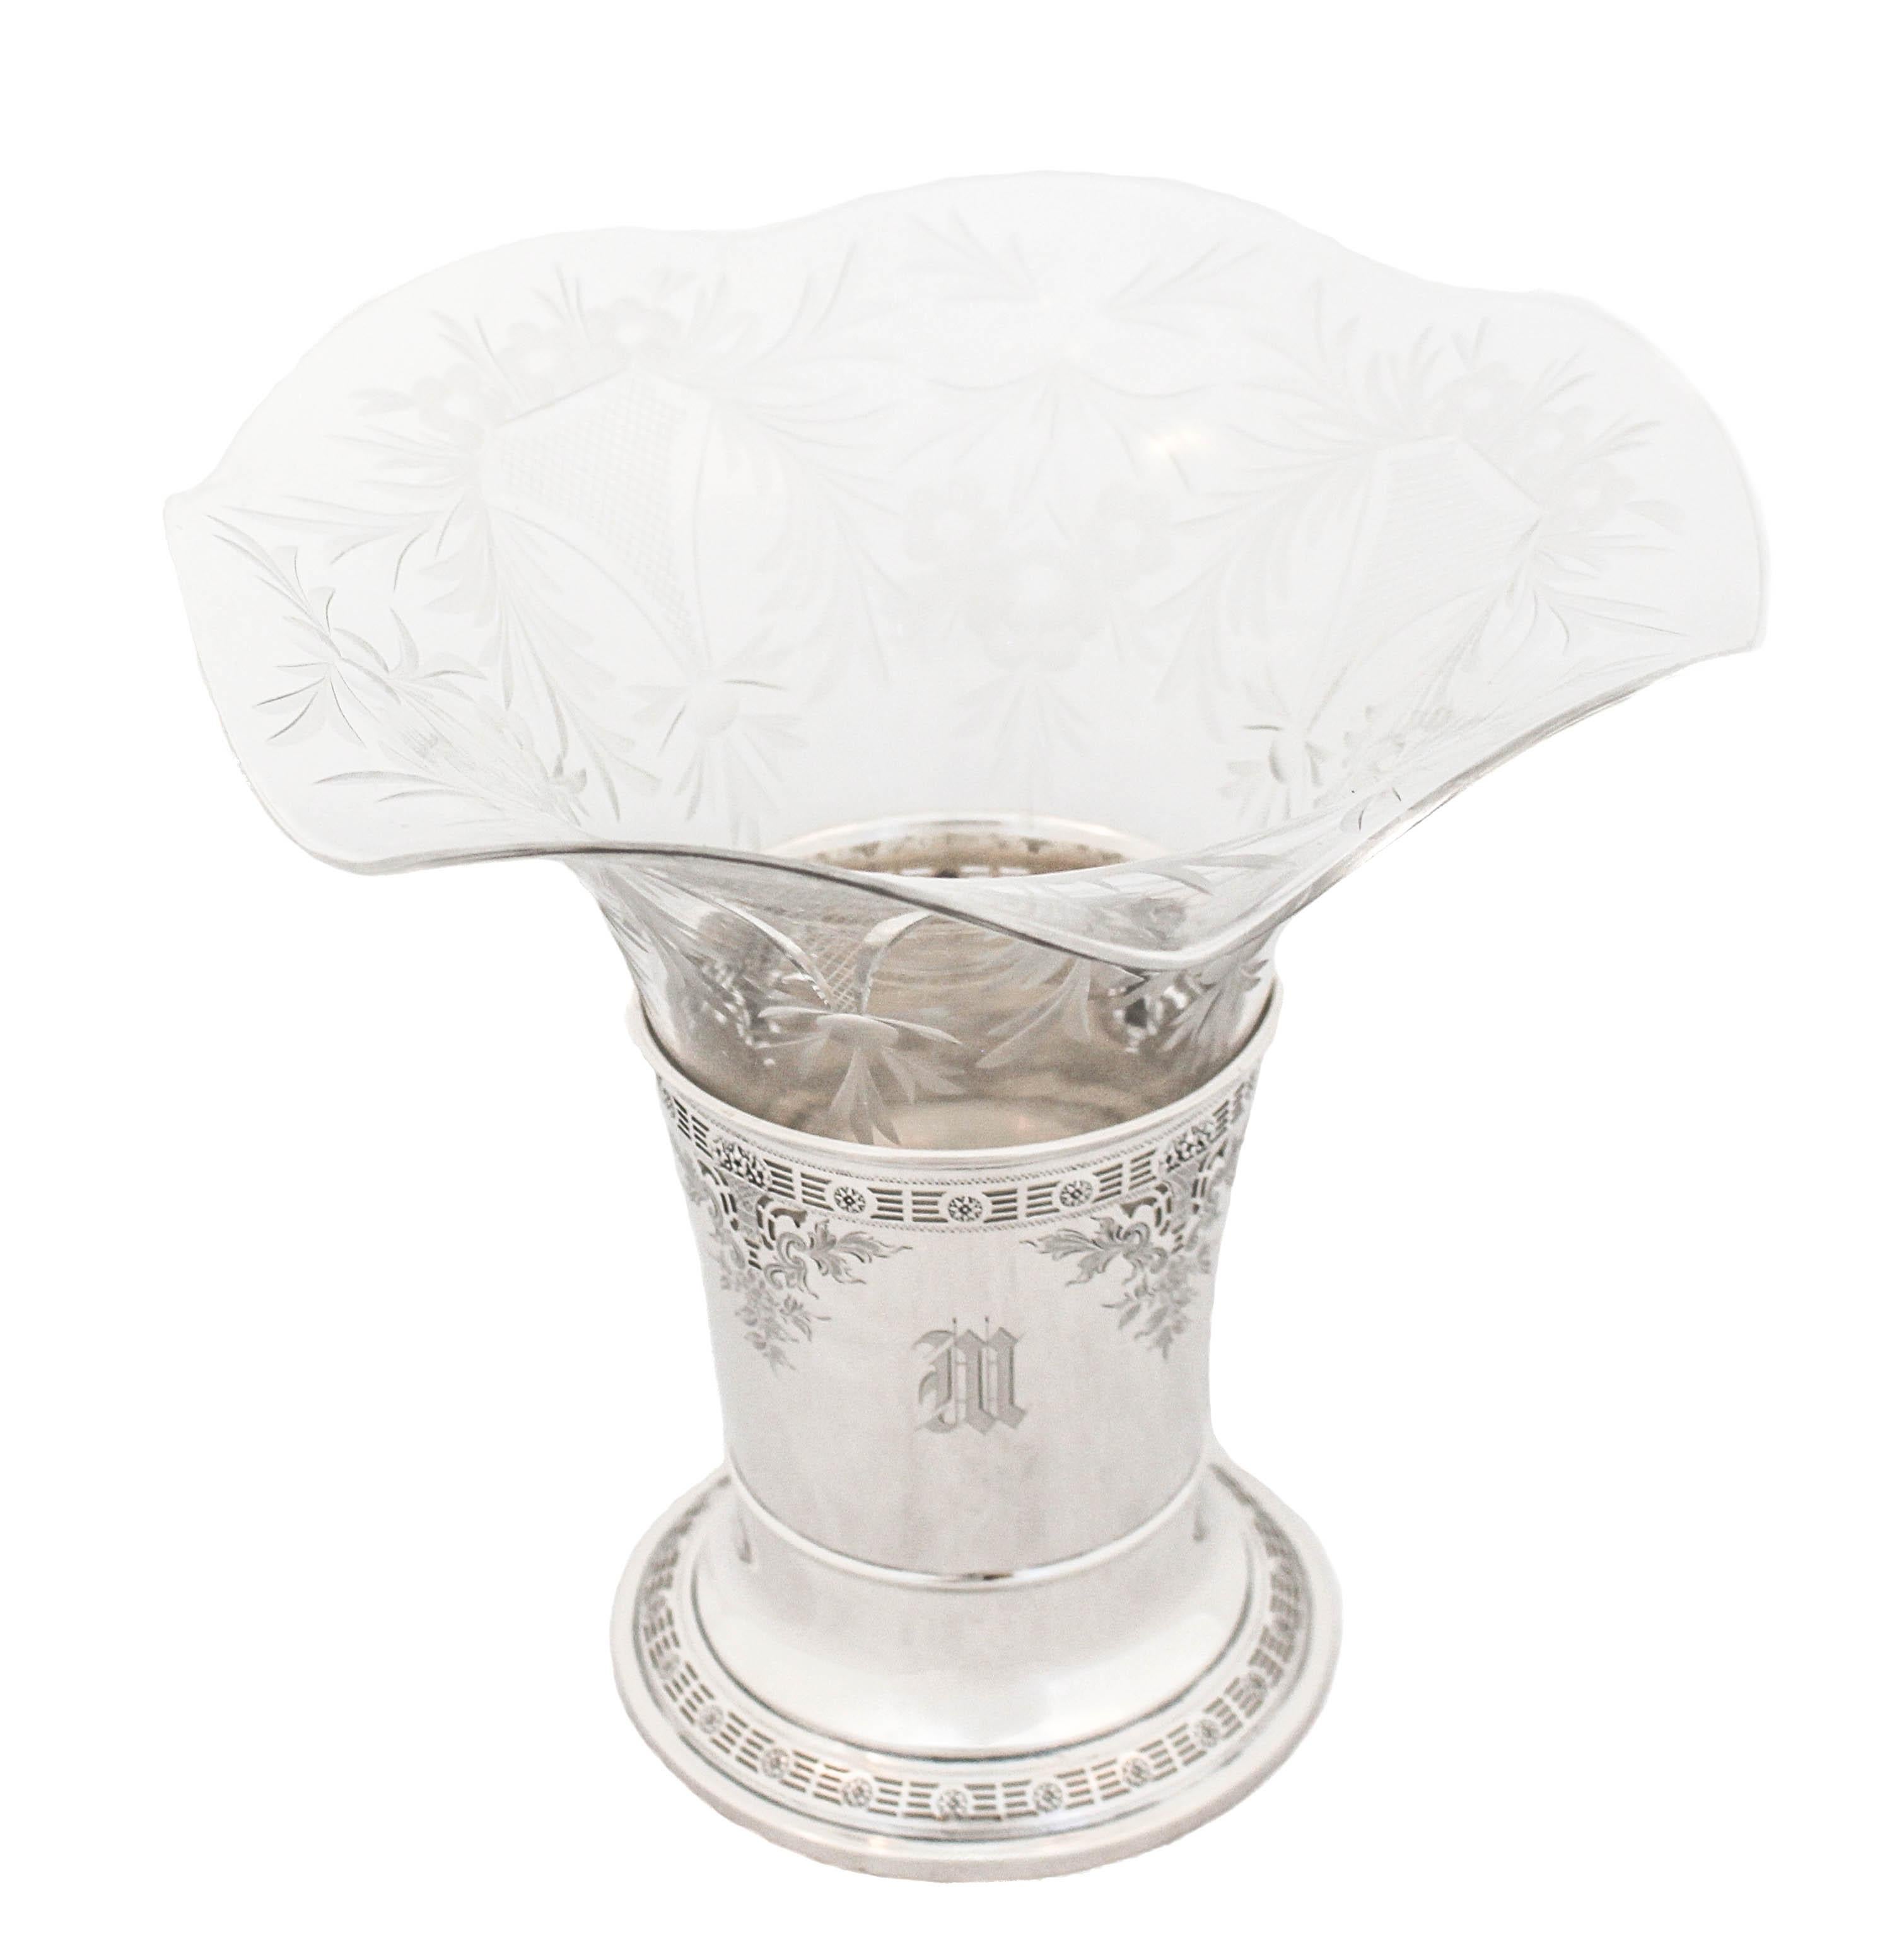 Being offered is a sterling silver vase with a crystal liner by Dominick and Haff.  The sterling base has a reticulated pattern around the middle and bottom and is NOT weighted.  The crystal liner is fluted with acid-etched flowers and leaves all